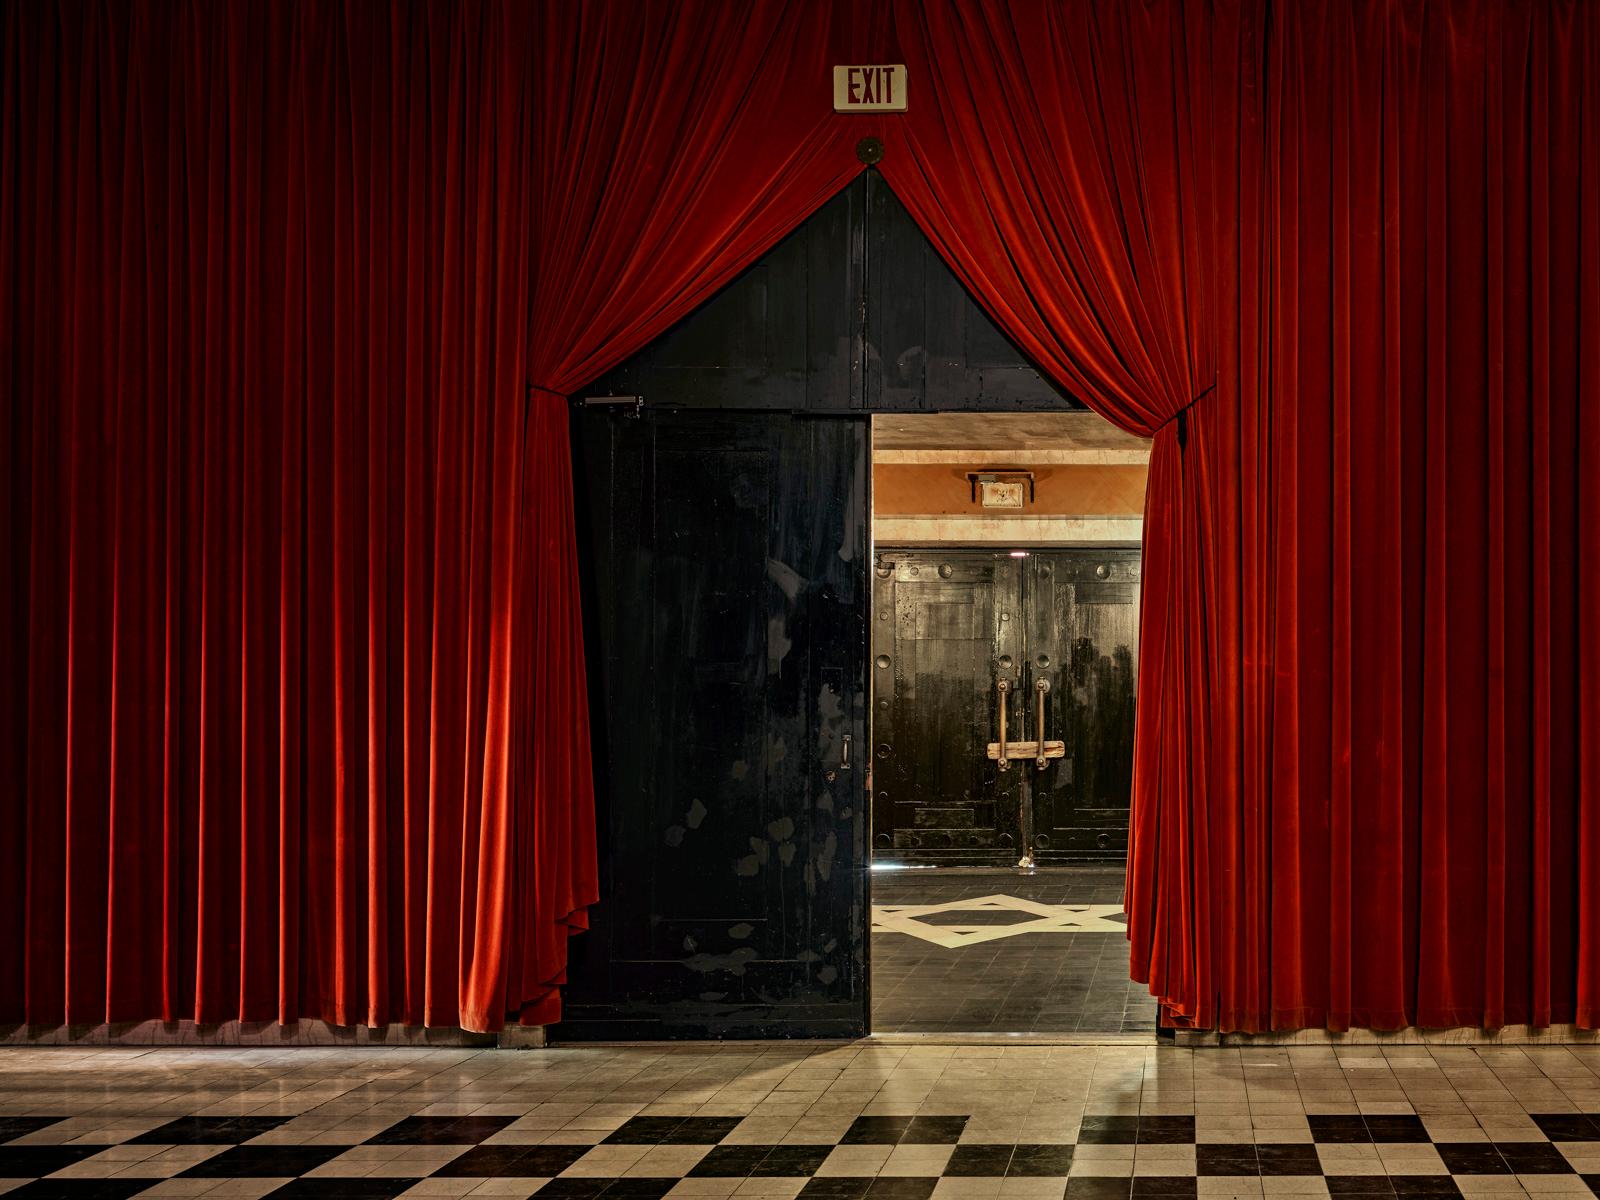 Archival Pigment Print

Former Masonic Lodge, Mobile AL

All available sizes & editions for each size of this photograph:
30" x 40” - Edition of 5 + 2 Artist Proofs
40" X 50"- Edition of 5 + 2 Artist Proofs
50" X 60"-  Edition of 5 + 2 Artist